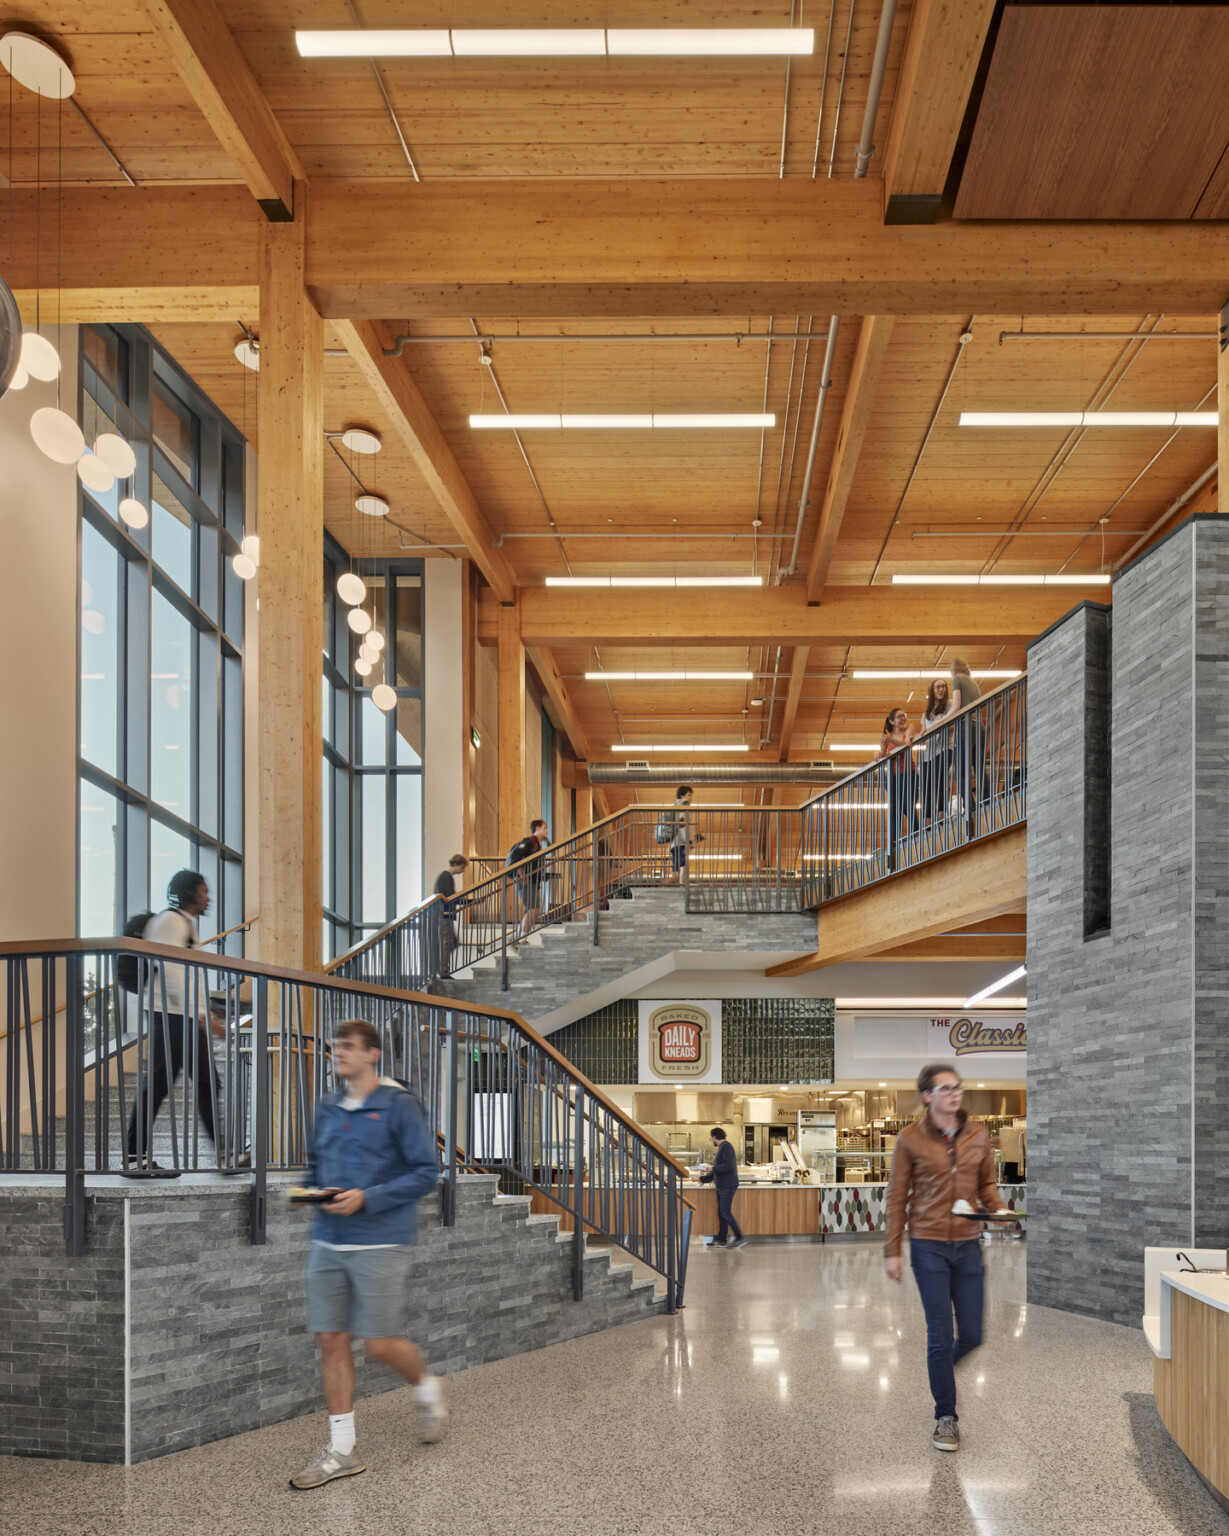 Double height atrium with exposed wood mass timber beams, columns, and ceiling. Grey accents. Dining options along walls, balcony above